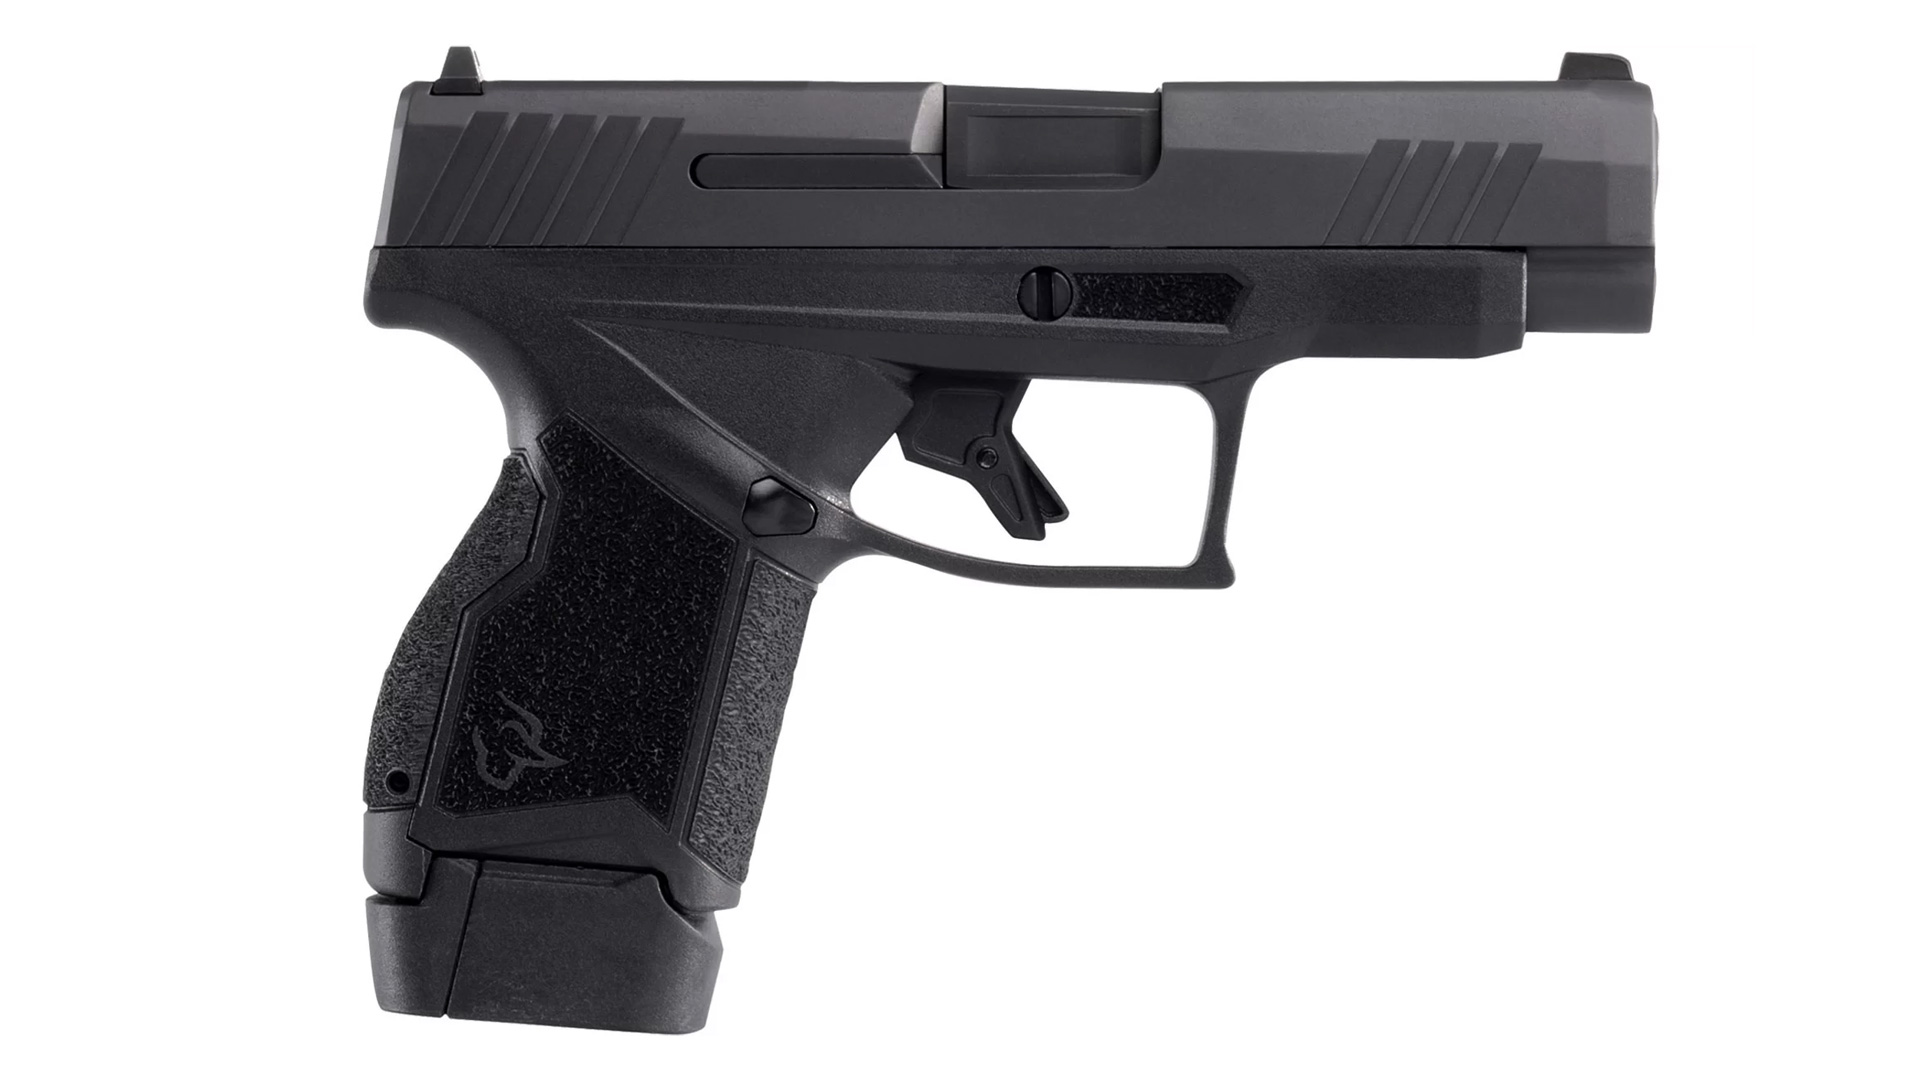 Holiday Rebate On Taurus G Series Pistols An Official Journal Of The NRA